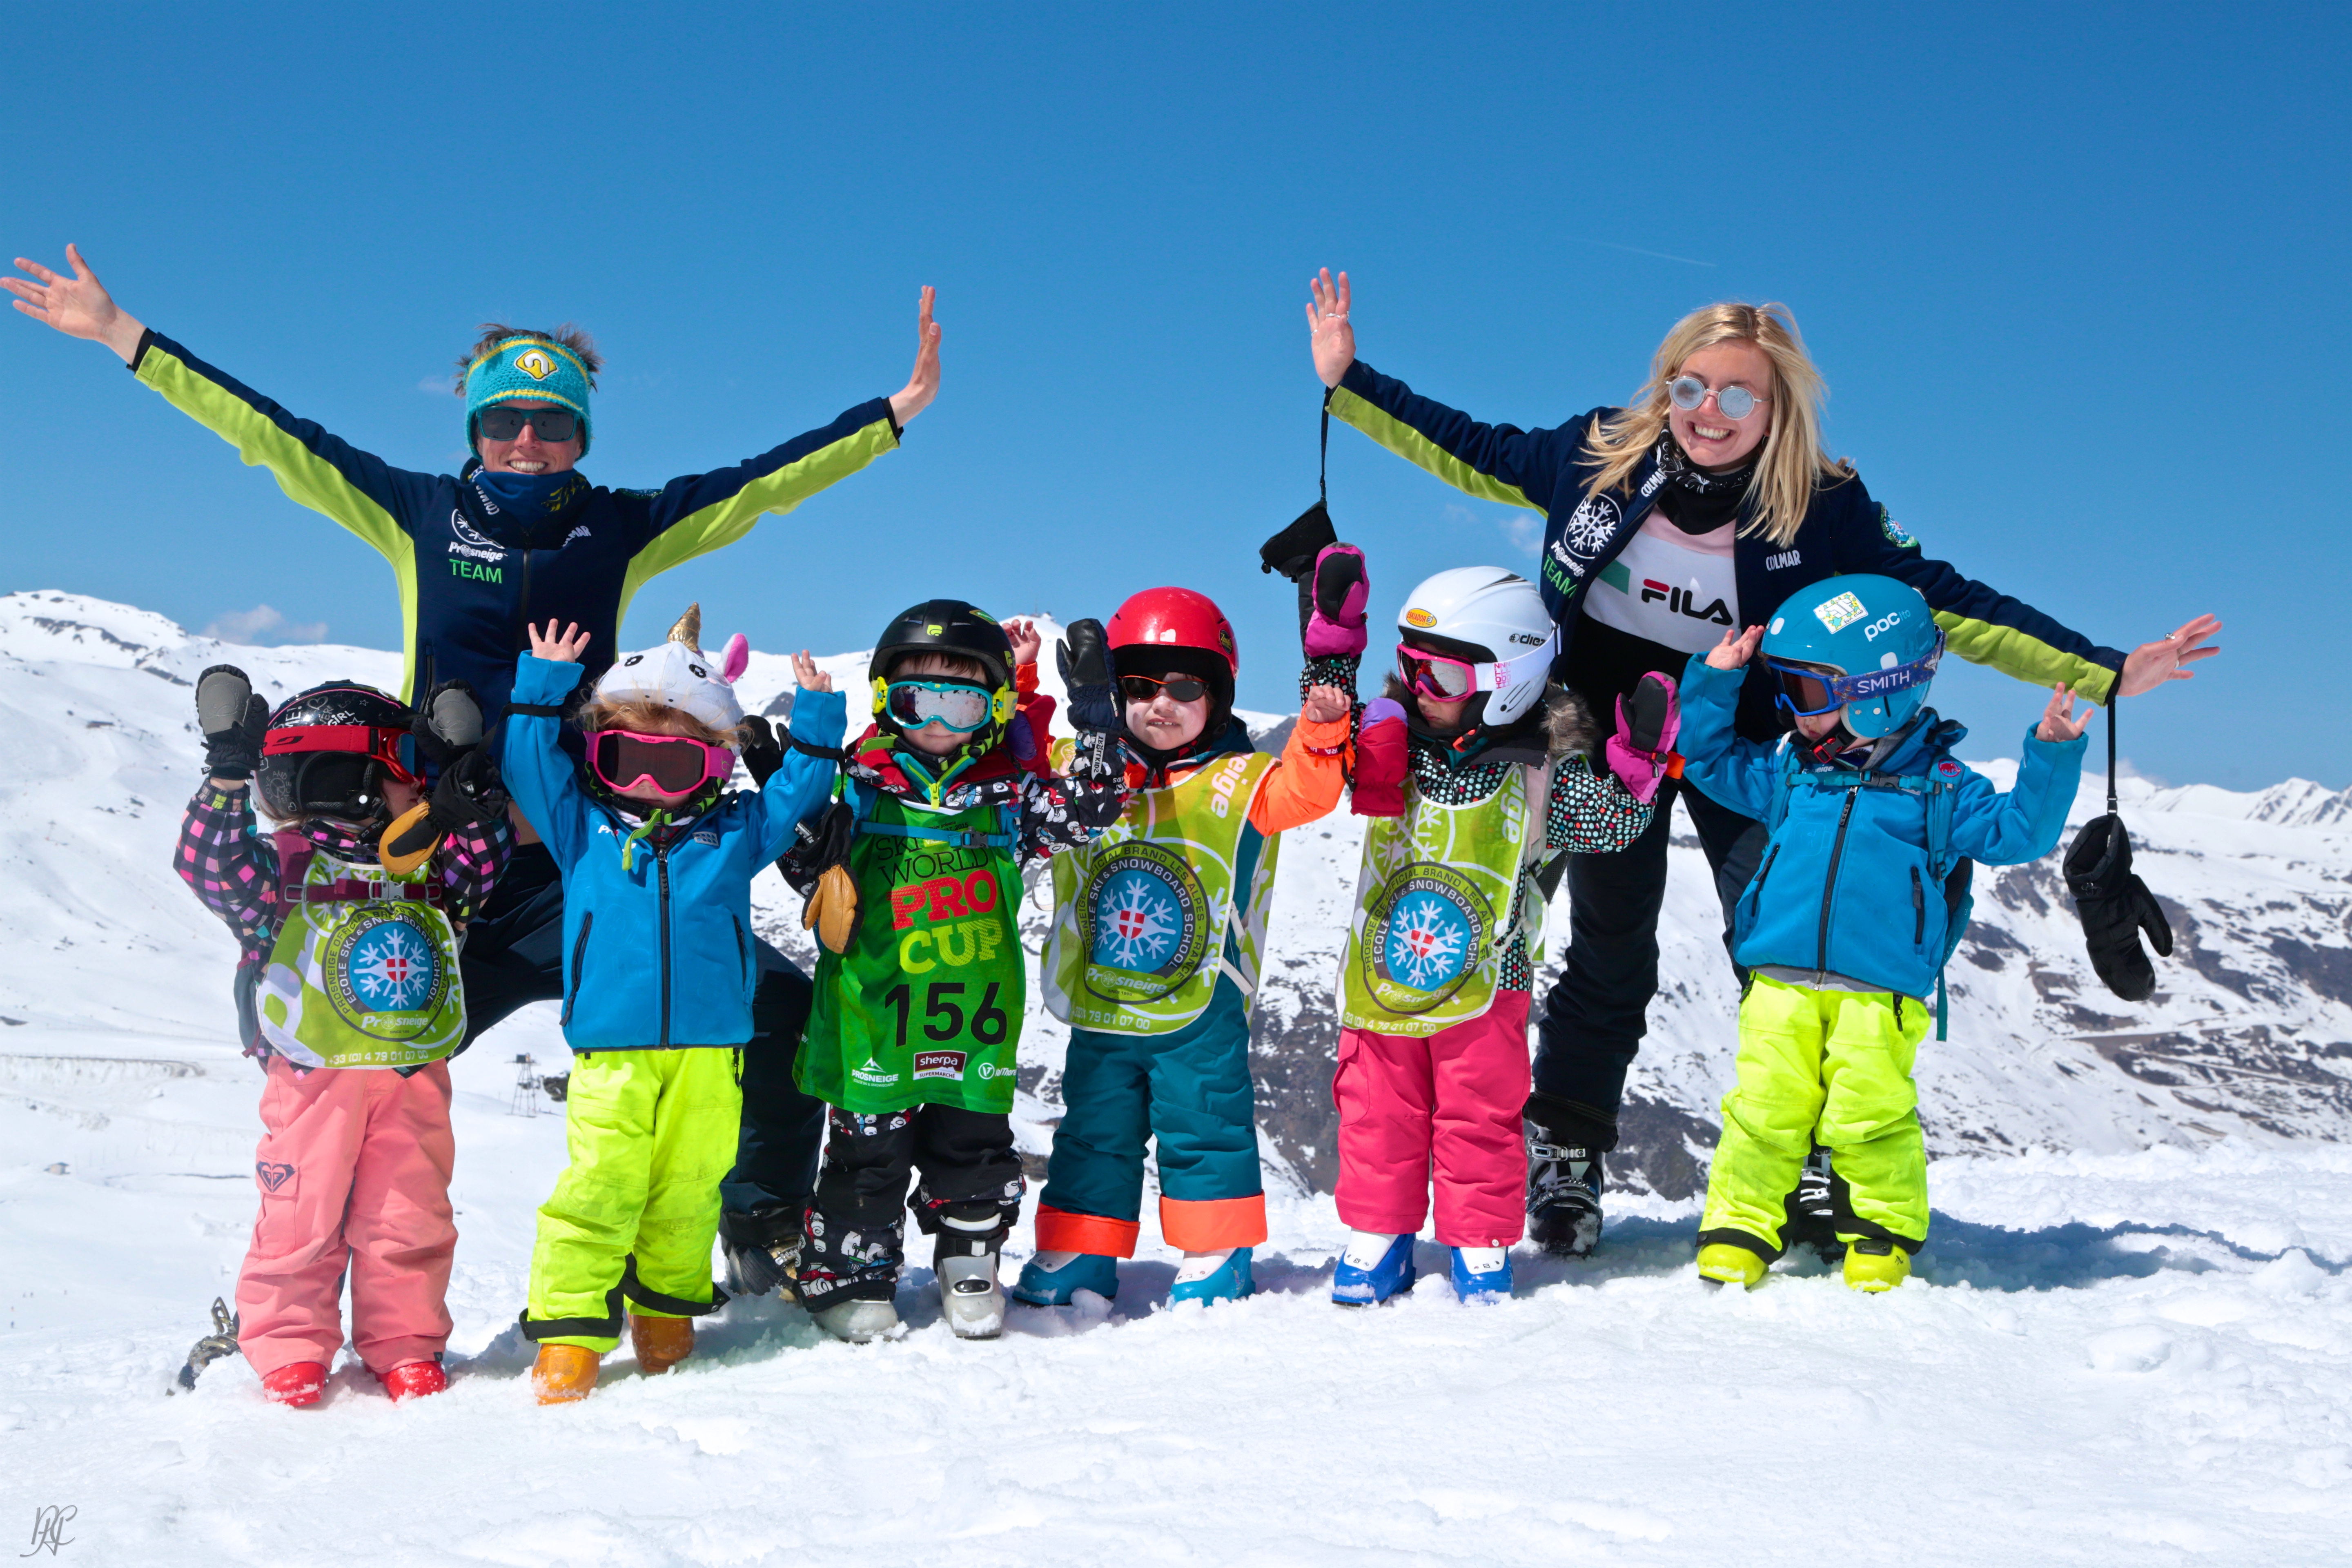 Verheugen Persoonlijk Verfijnen Baby ski - Tuesday, Wednesday and/or Thursday (1h/day) - 2 to 3 years old